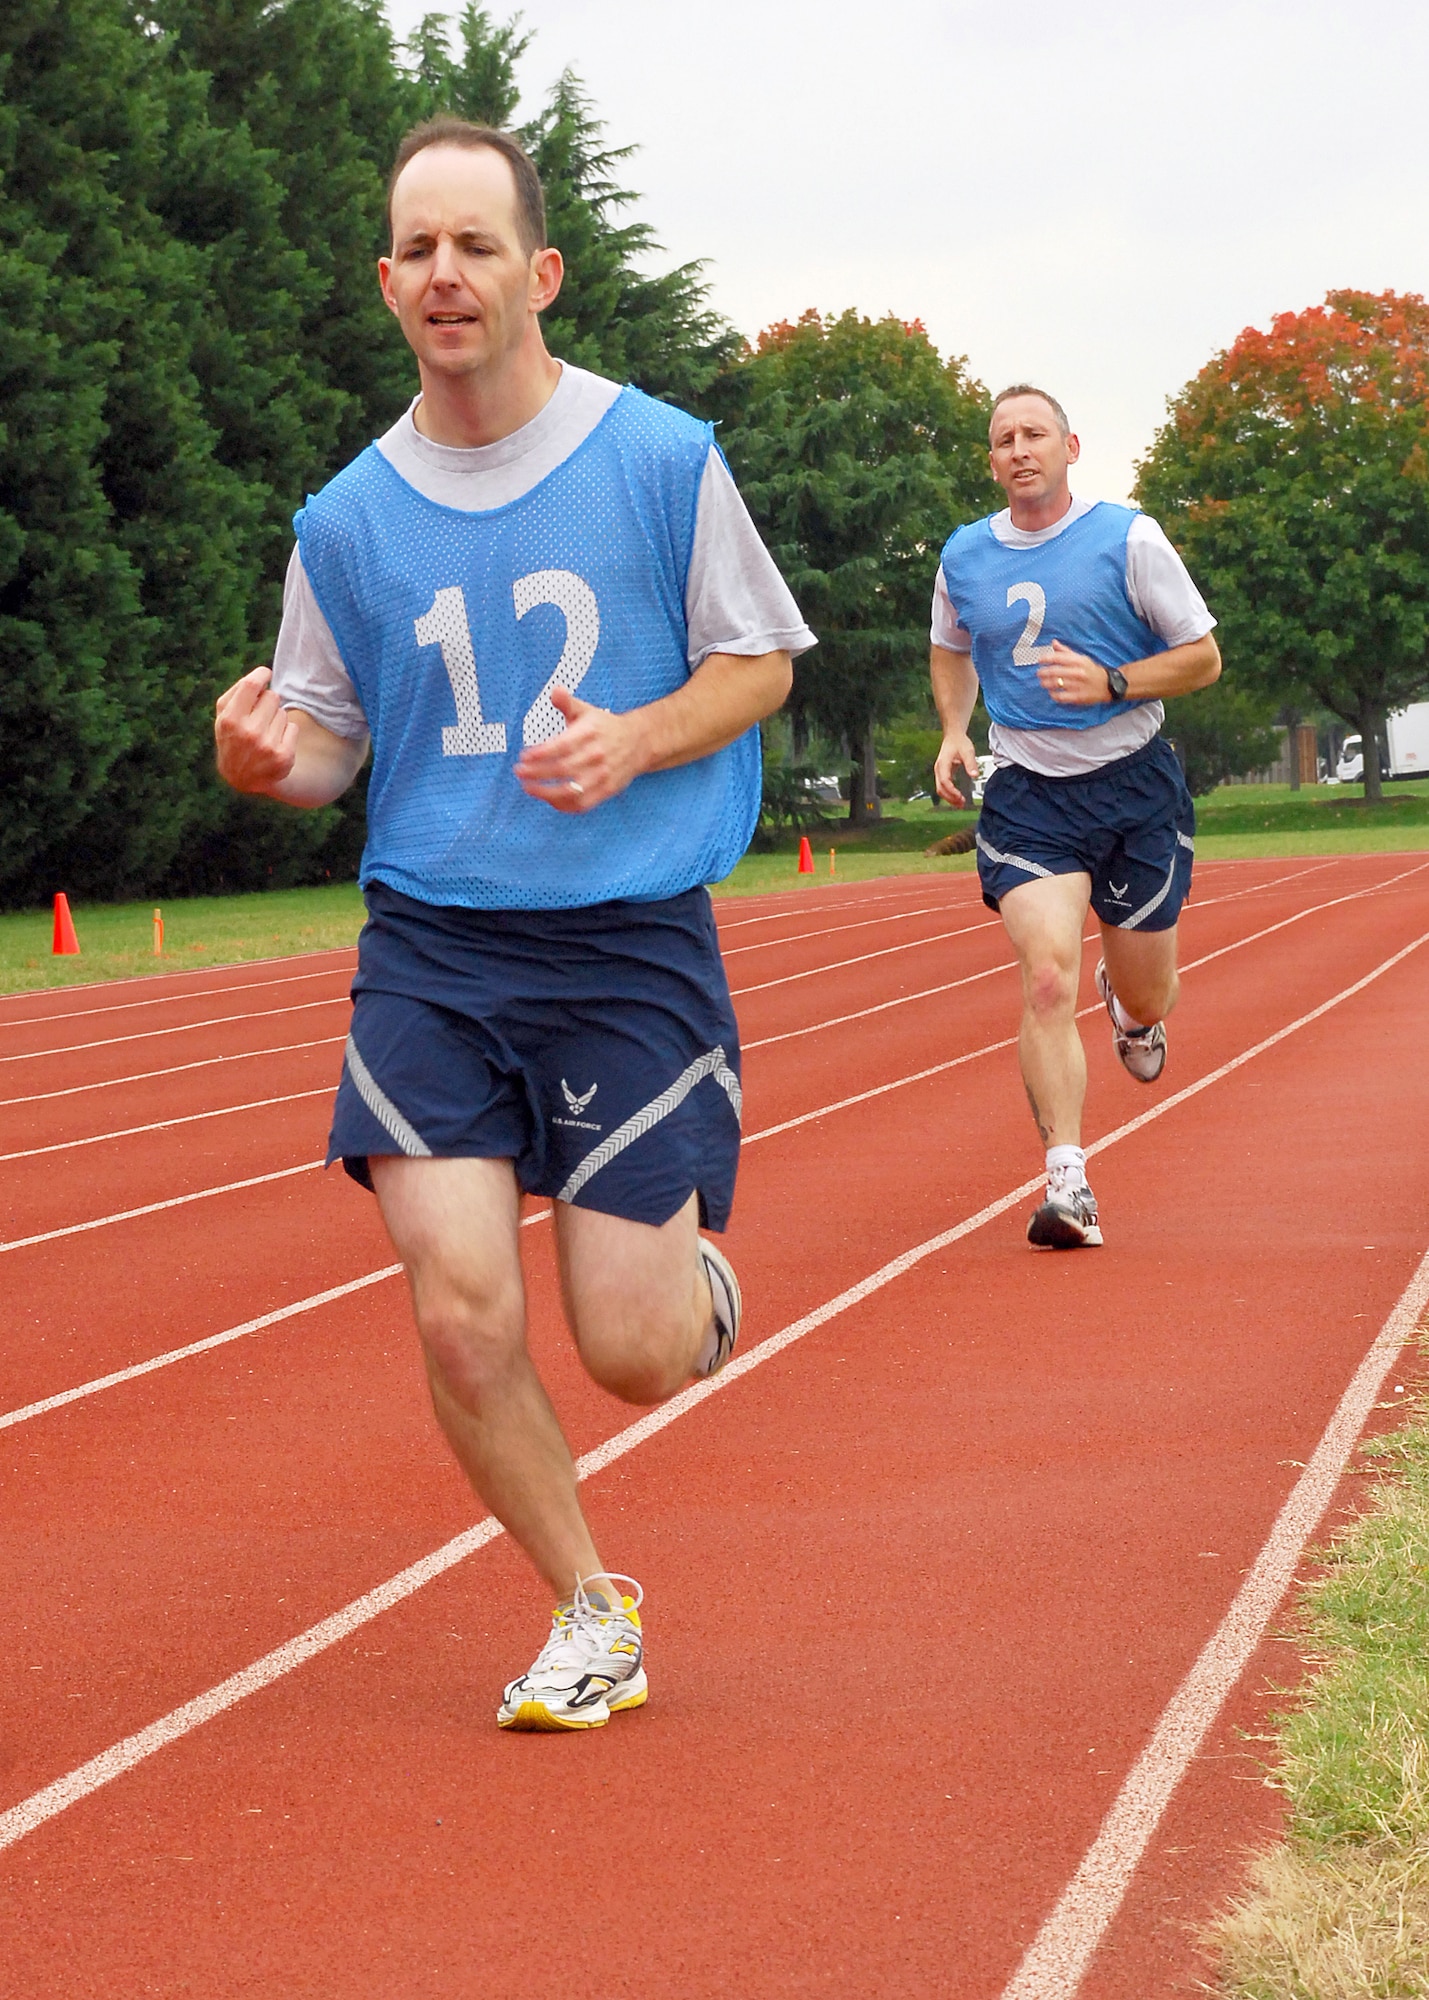 Air Force members sprint toward the finish line to complete their 1.5 mile run of the Air Force Fitness Test at Joint Base Anacostia-Bolling Oct 19, 2010. The Air Force uses an overall composite fitness score and minimum scores per component based on aerobic fitness, body composition and muscular fitness components to determine overall fitness. (U.S. Air Force photo/Master Sgt. Raheem Moore)